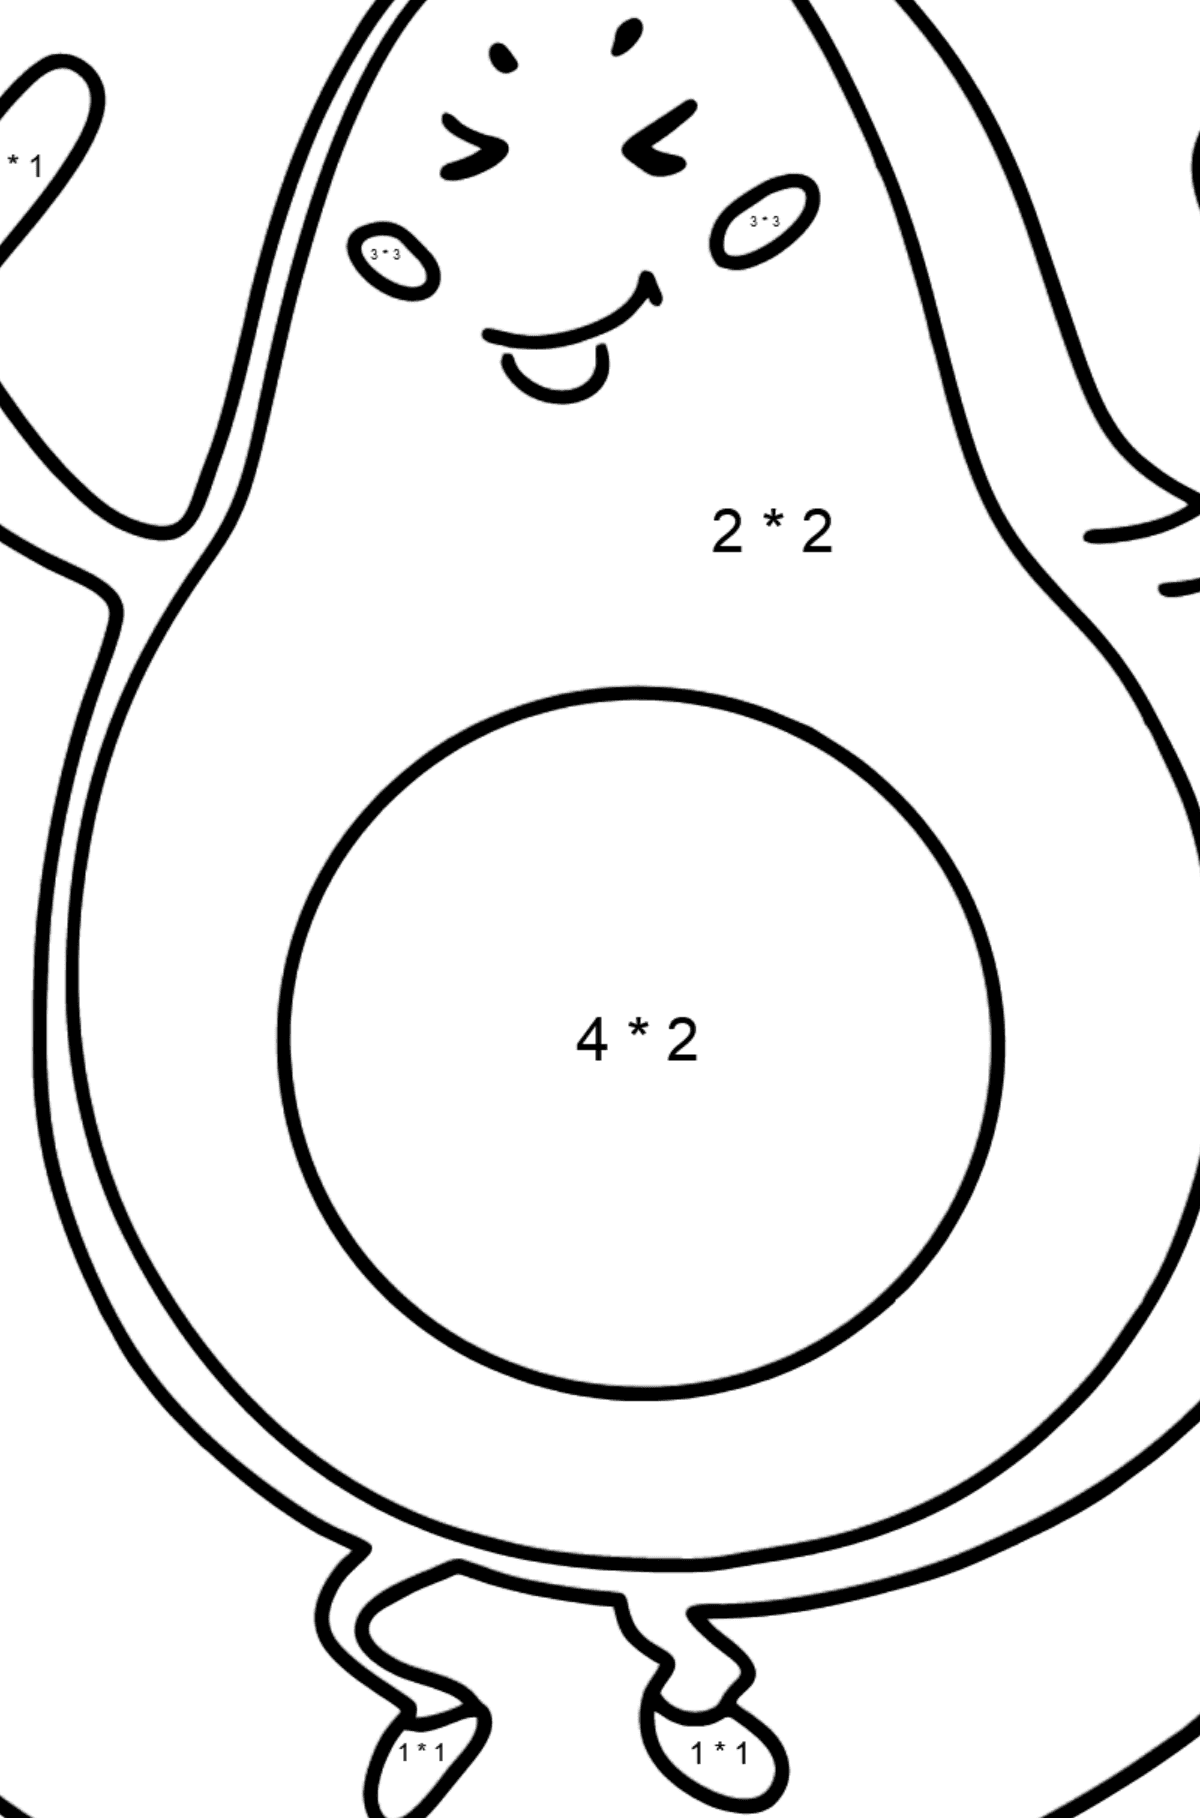 Avocado Gymnast coloring page - Math Coloring - Multiplication for Kids